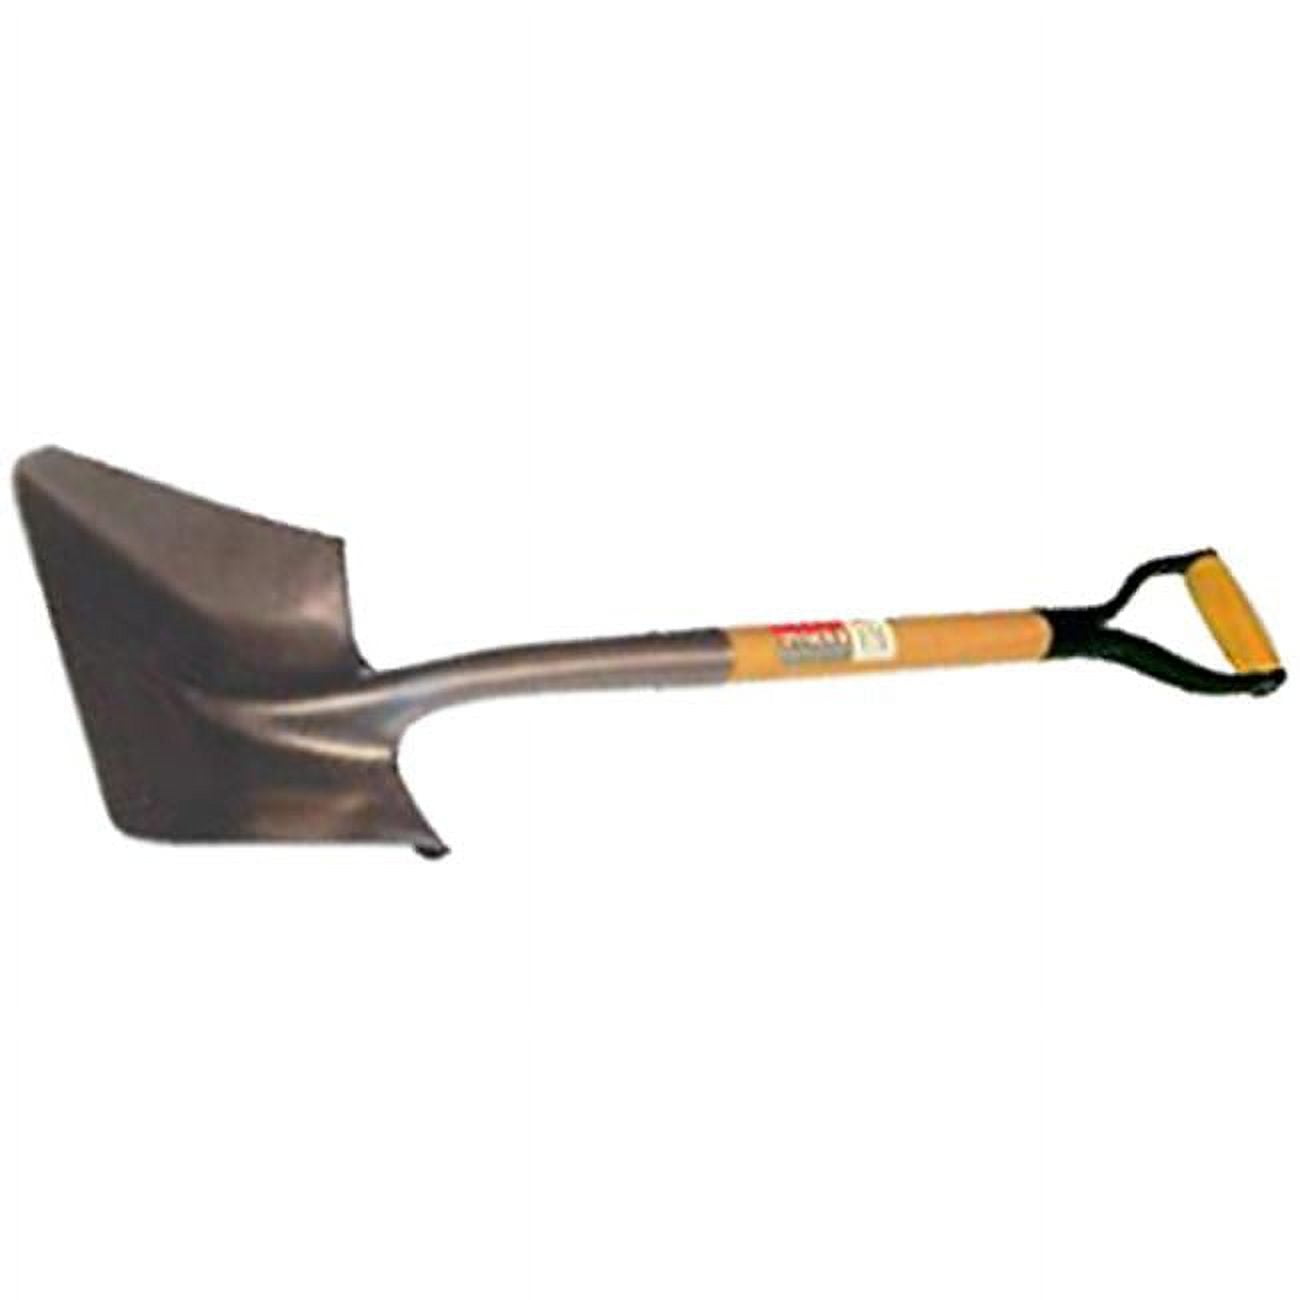 49833 D-handle Square Point Shovel With 26 In. Hardwood Handle